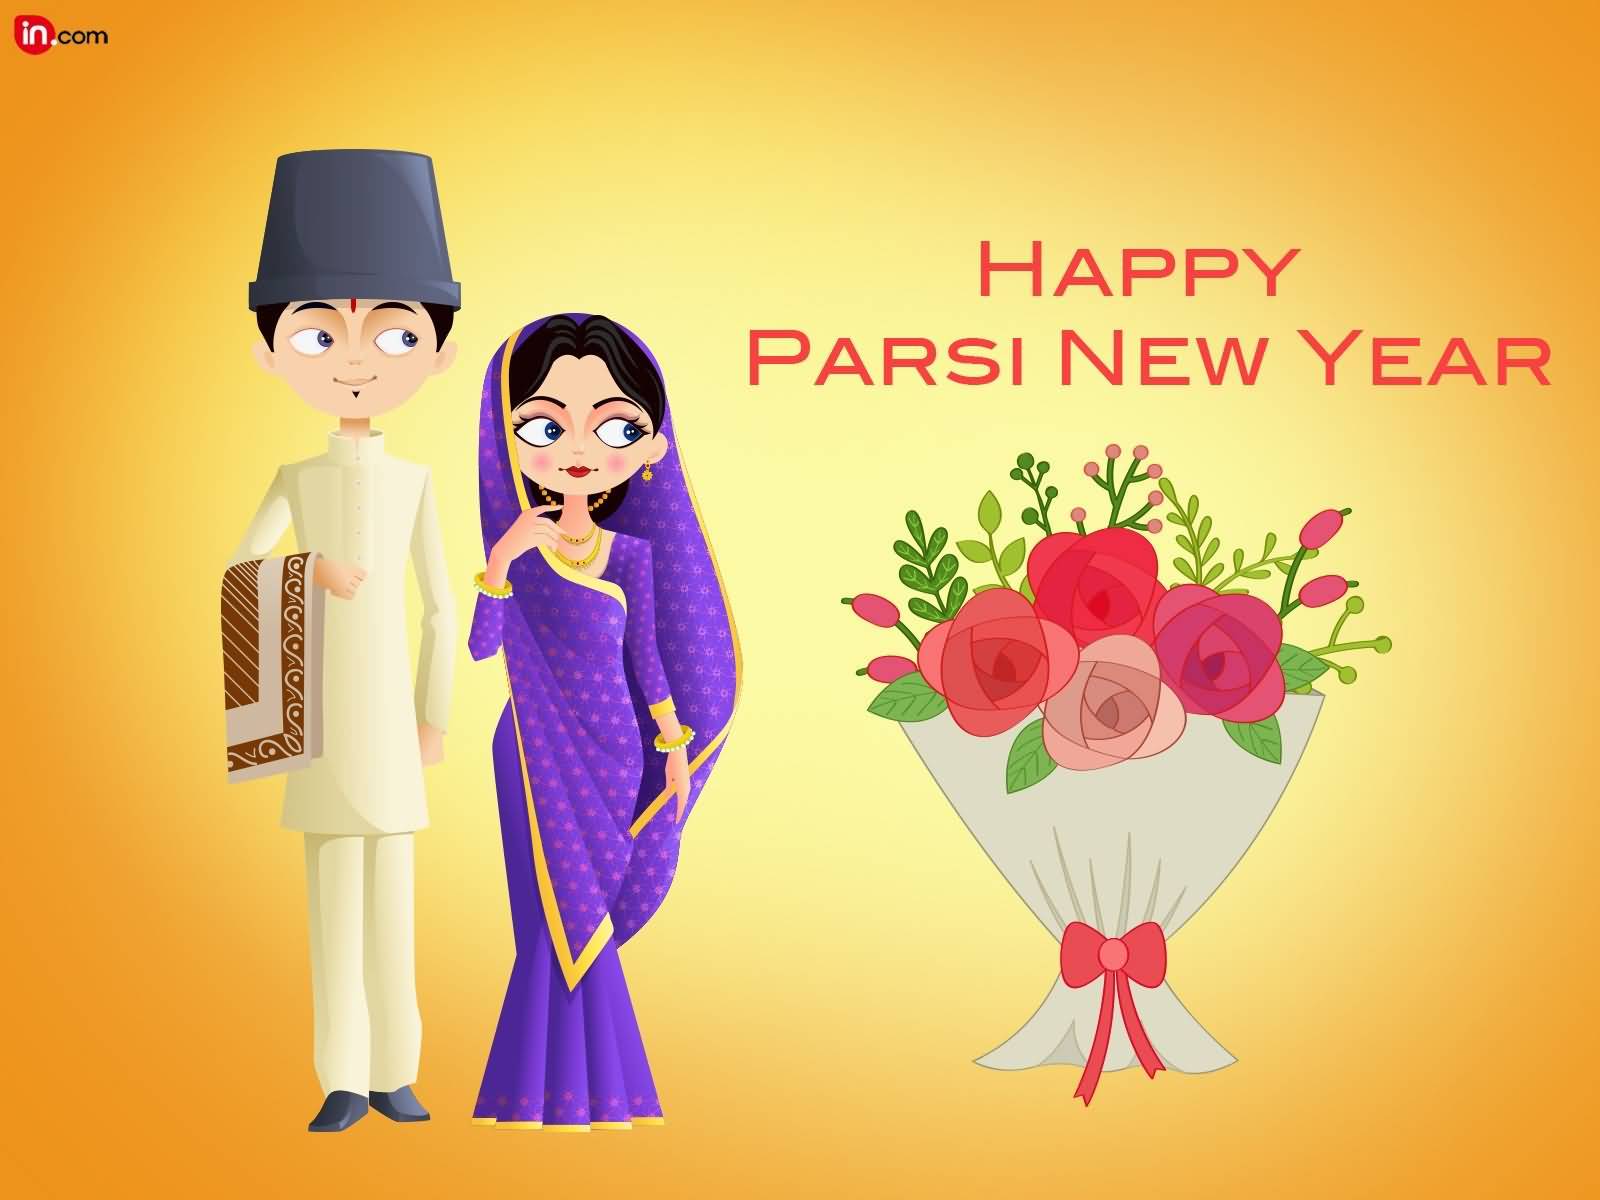 Happy Parsi New Year Parsi Couple With Flowers Bouquet Illustration